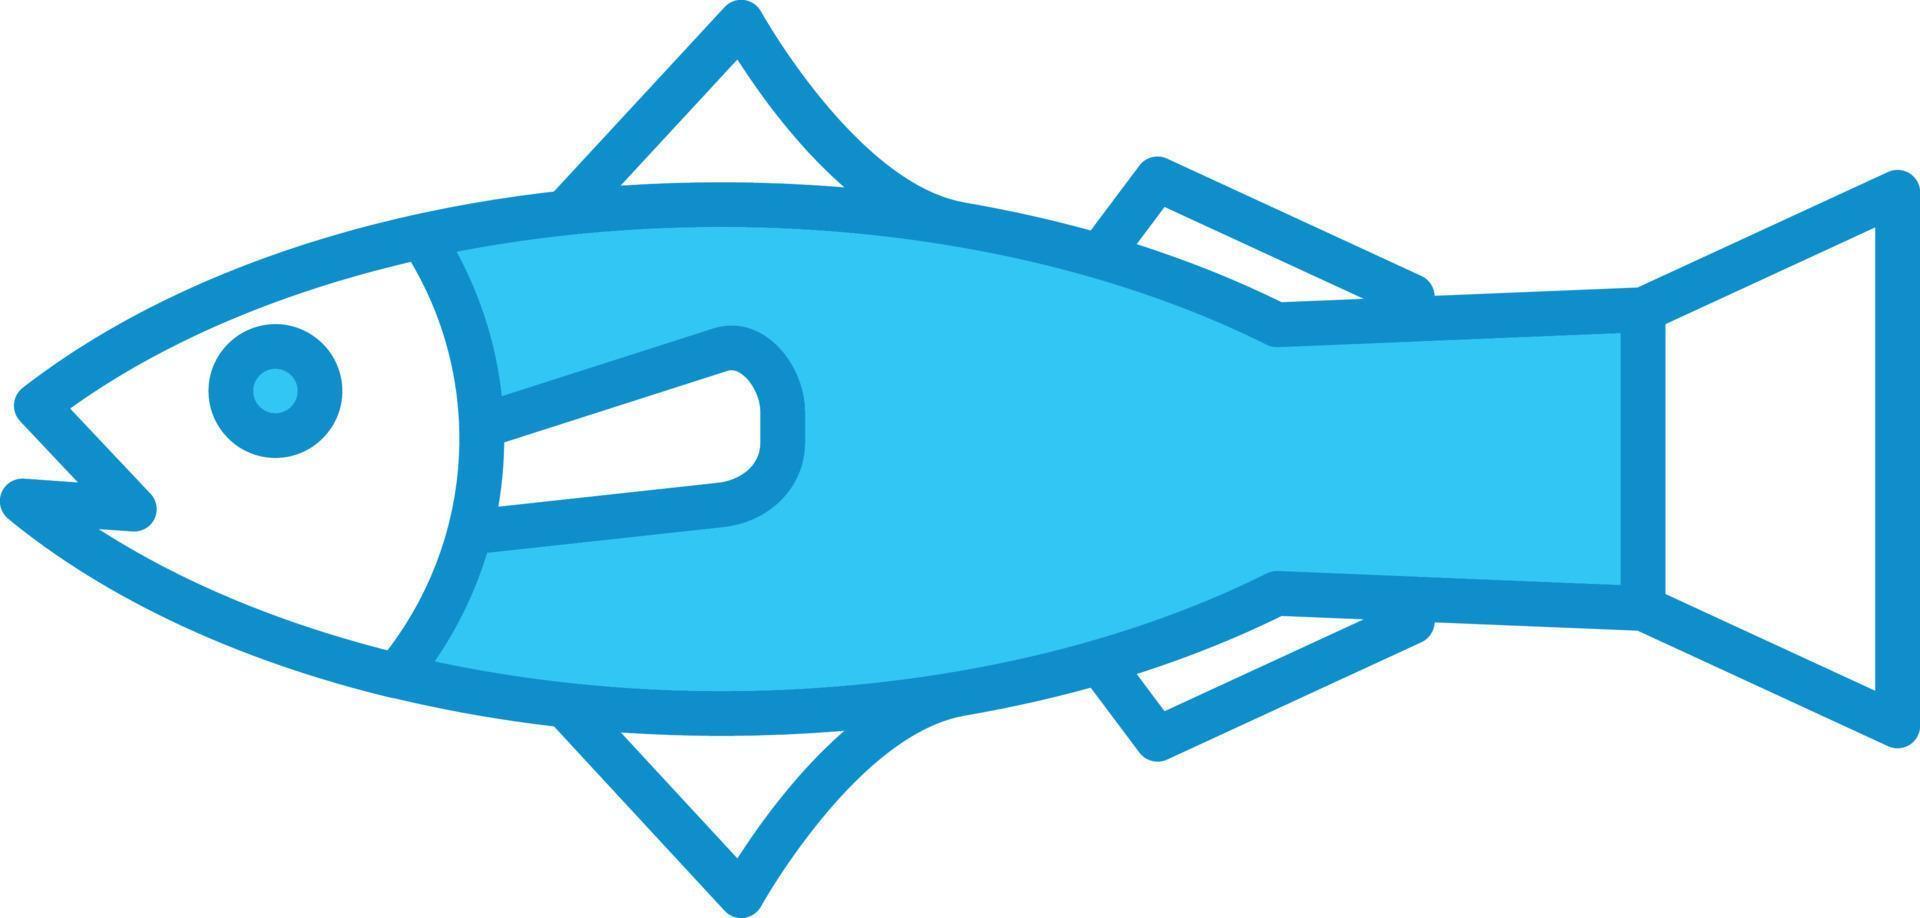 Salmon Line Filled Blue vector